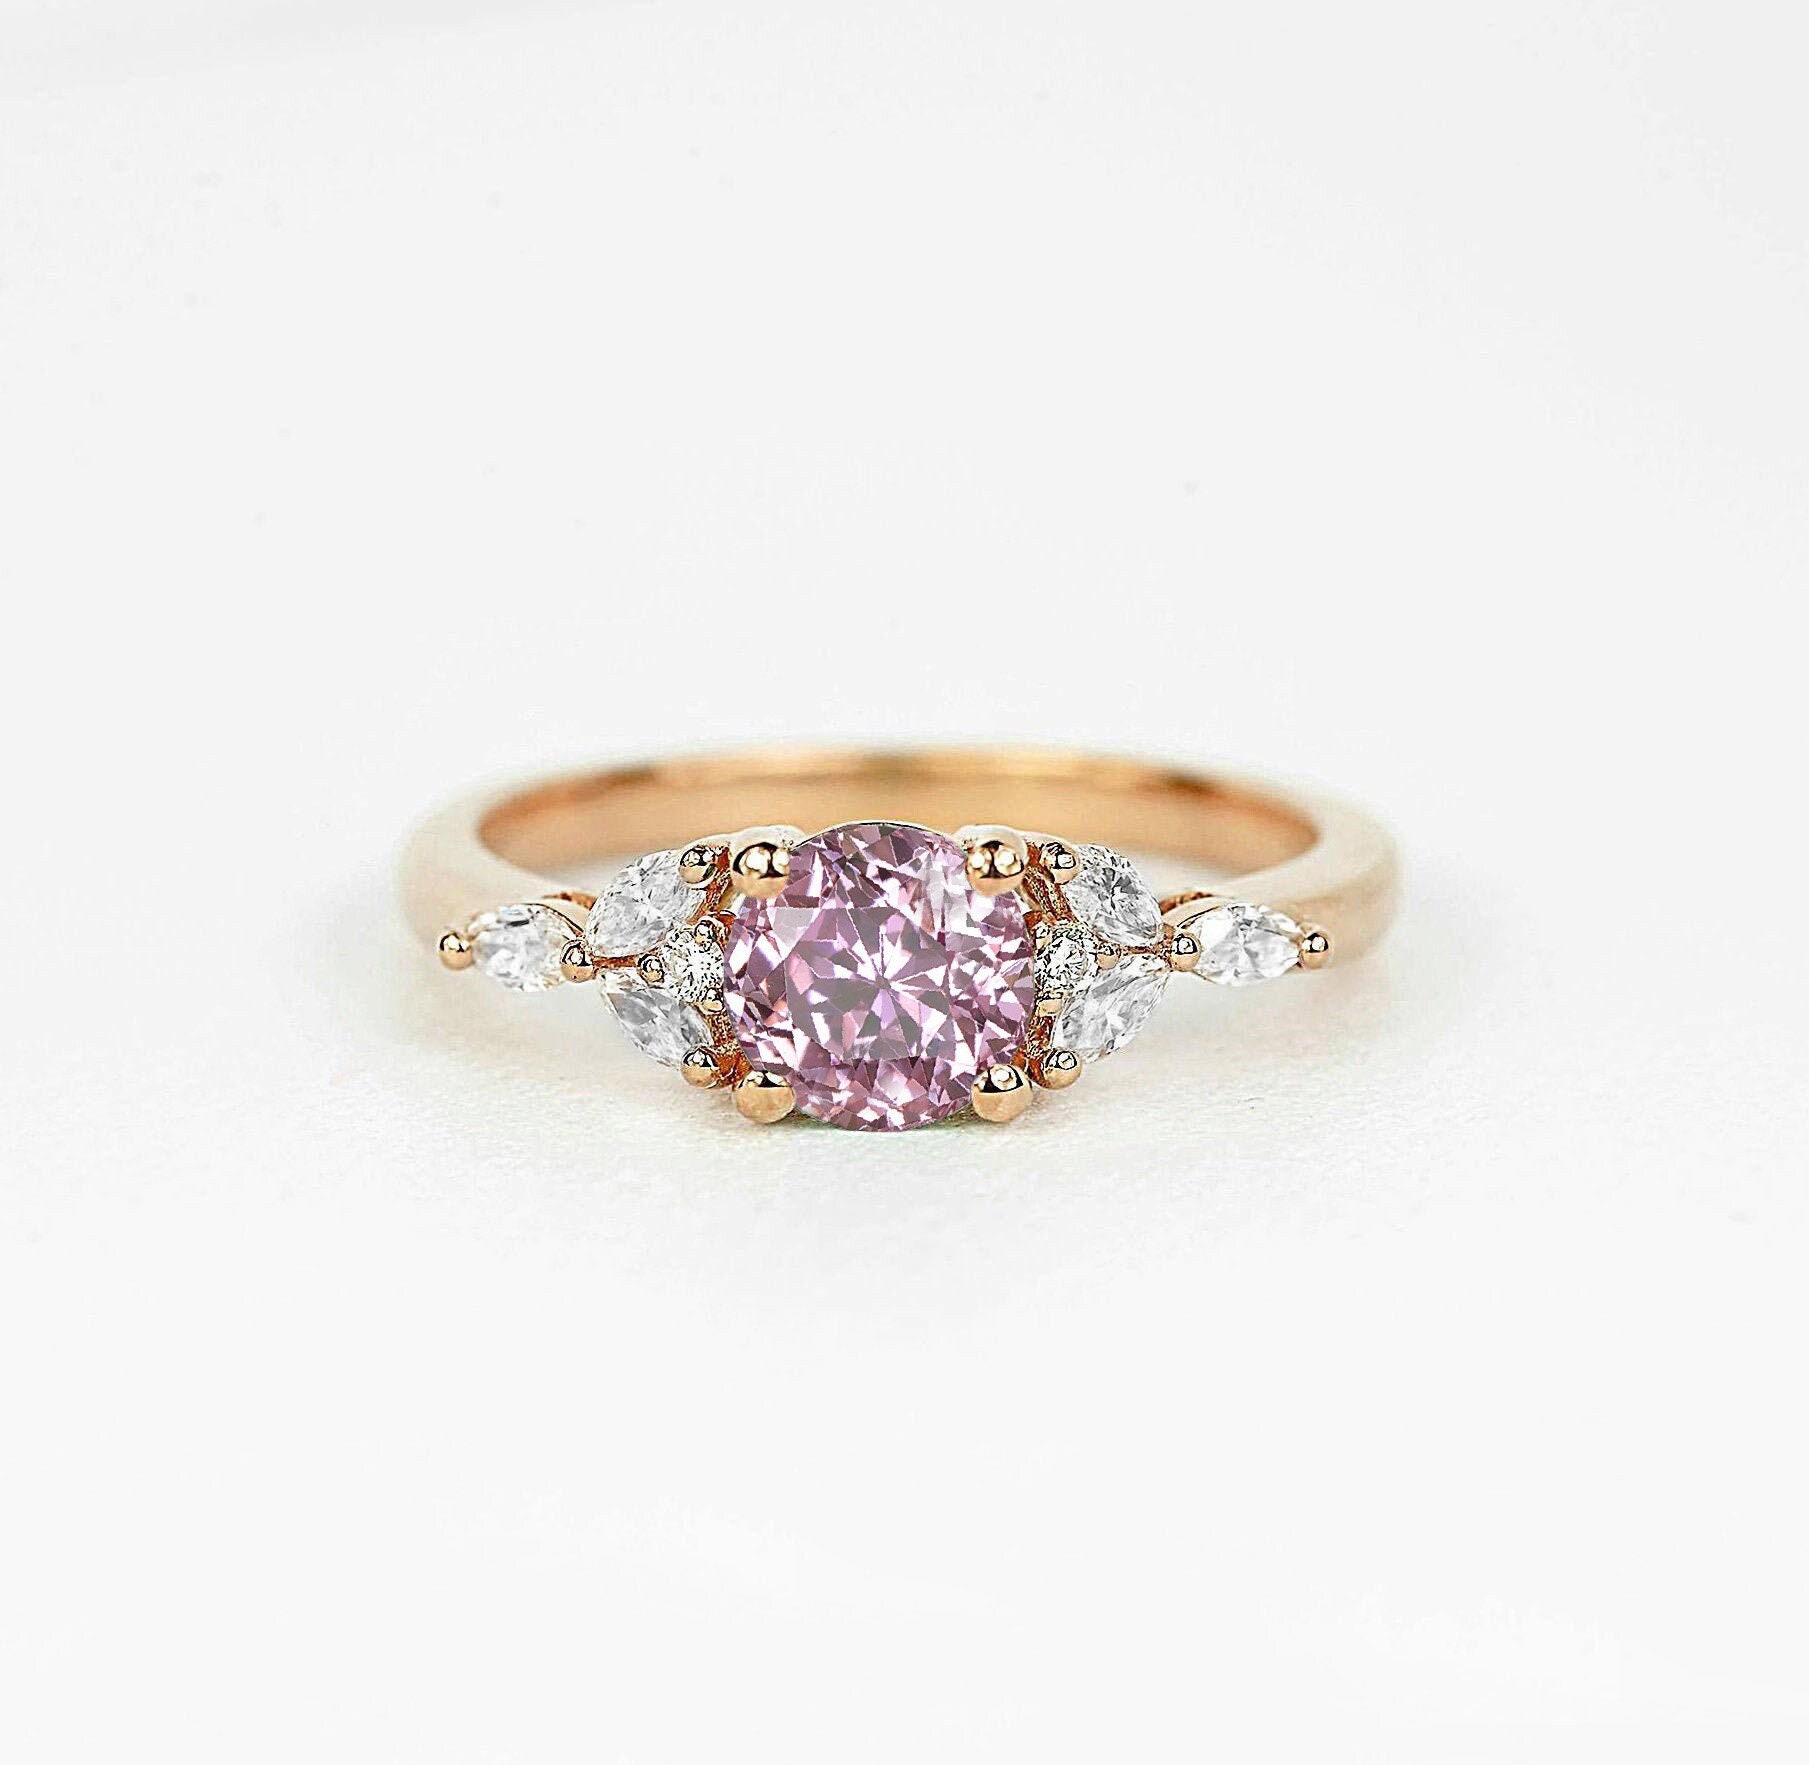 Round Light Pink Sapphire & Marquise Diamond Engagement Ring | Dainty Bridal Promise Art Deco Bespoke Ring For Her